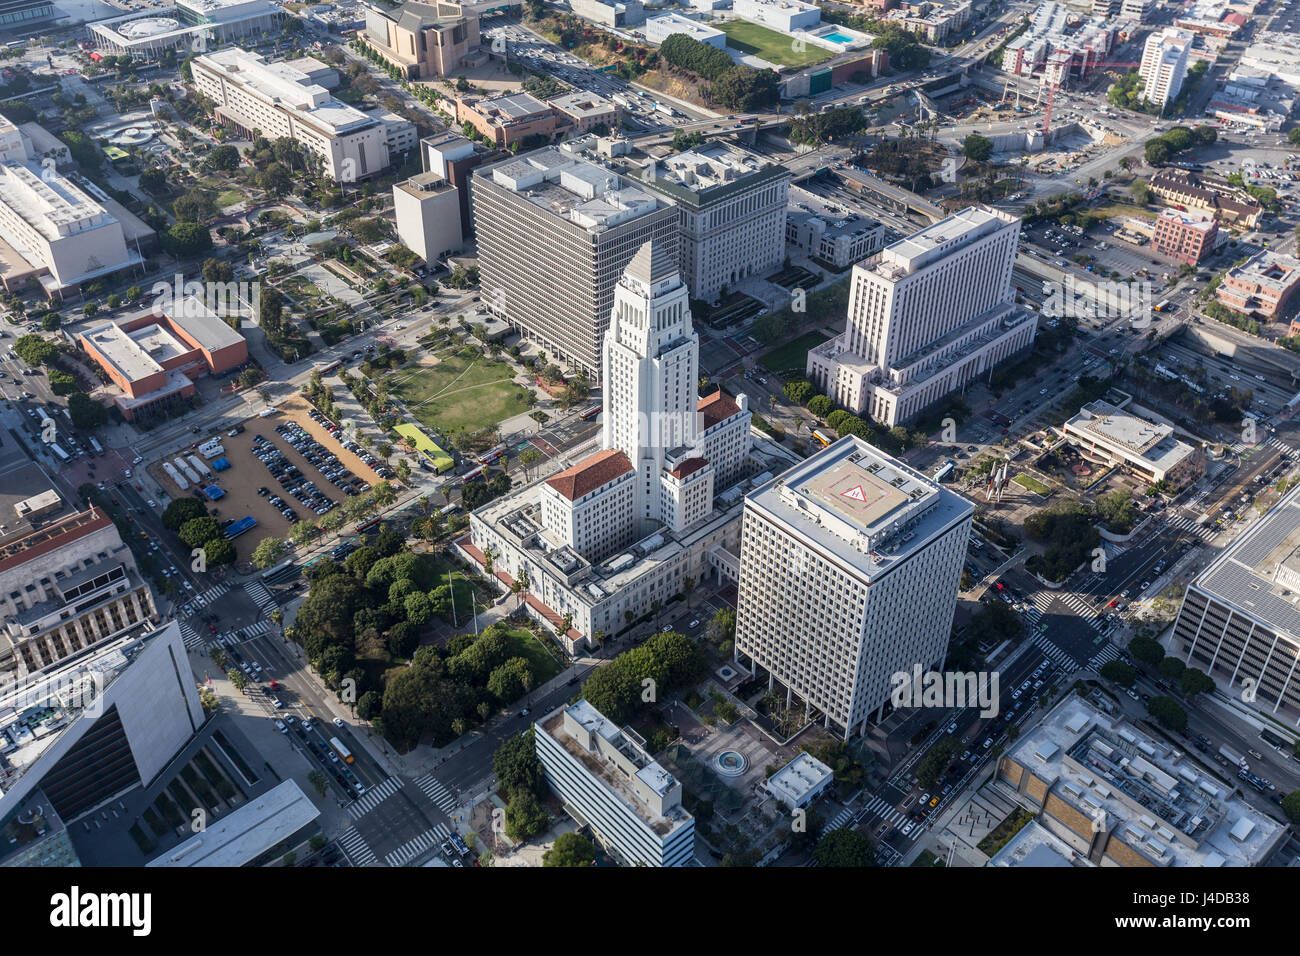 Los Angeles, California, USA - April 12, 2017:  Aerial view of historic City Hall and downtown government buildings. Stock Photo